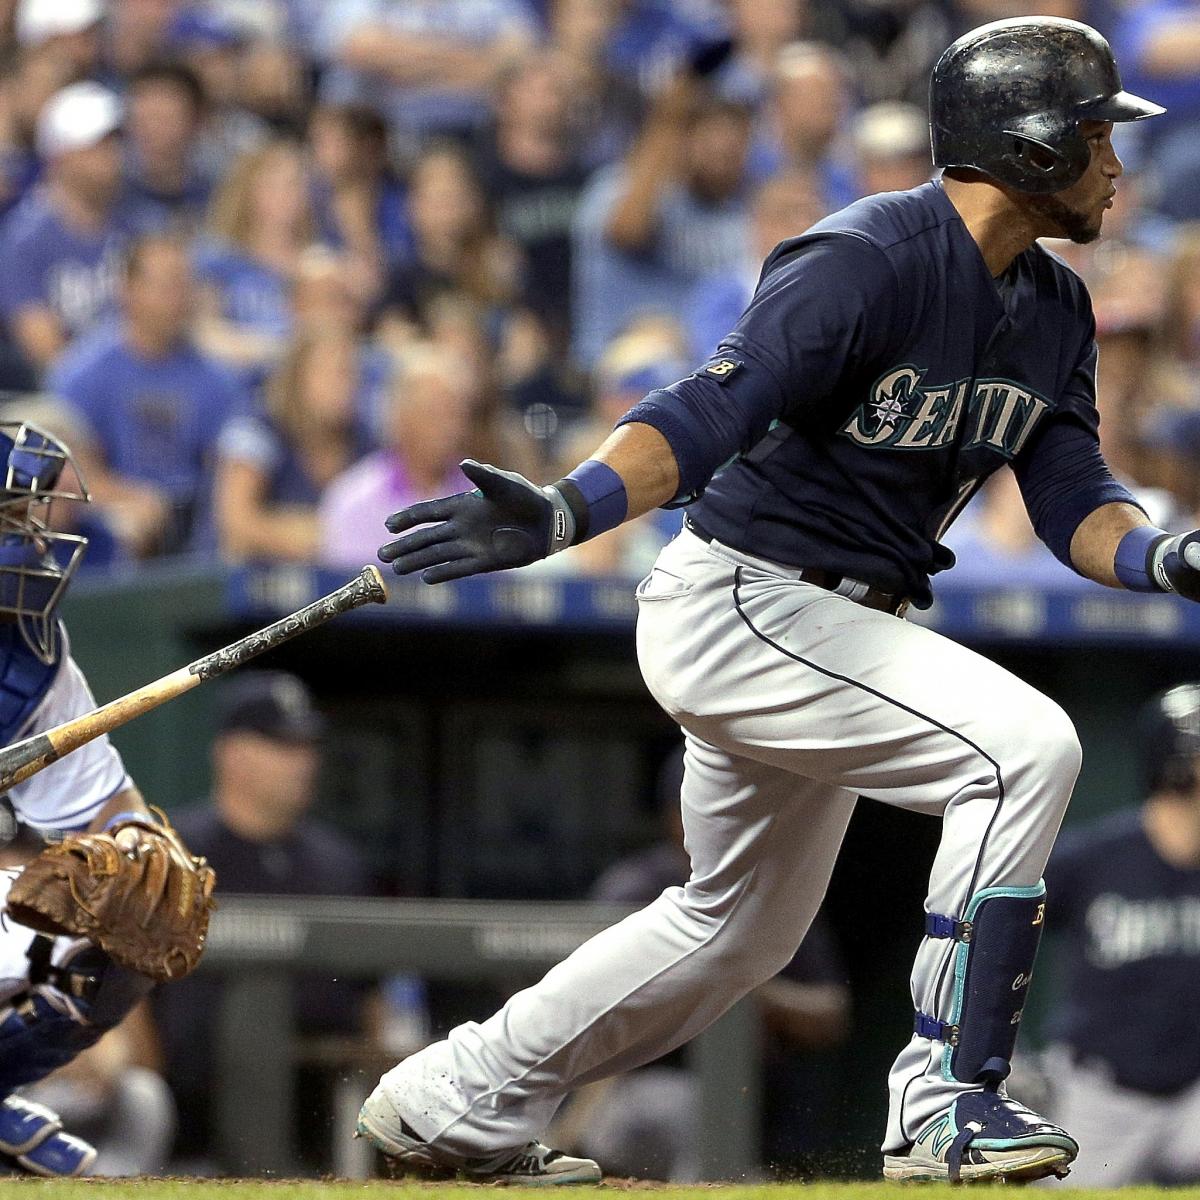 Robinson Canó — 2,000 Hits, by Mariners PR